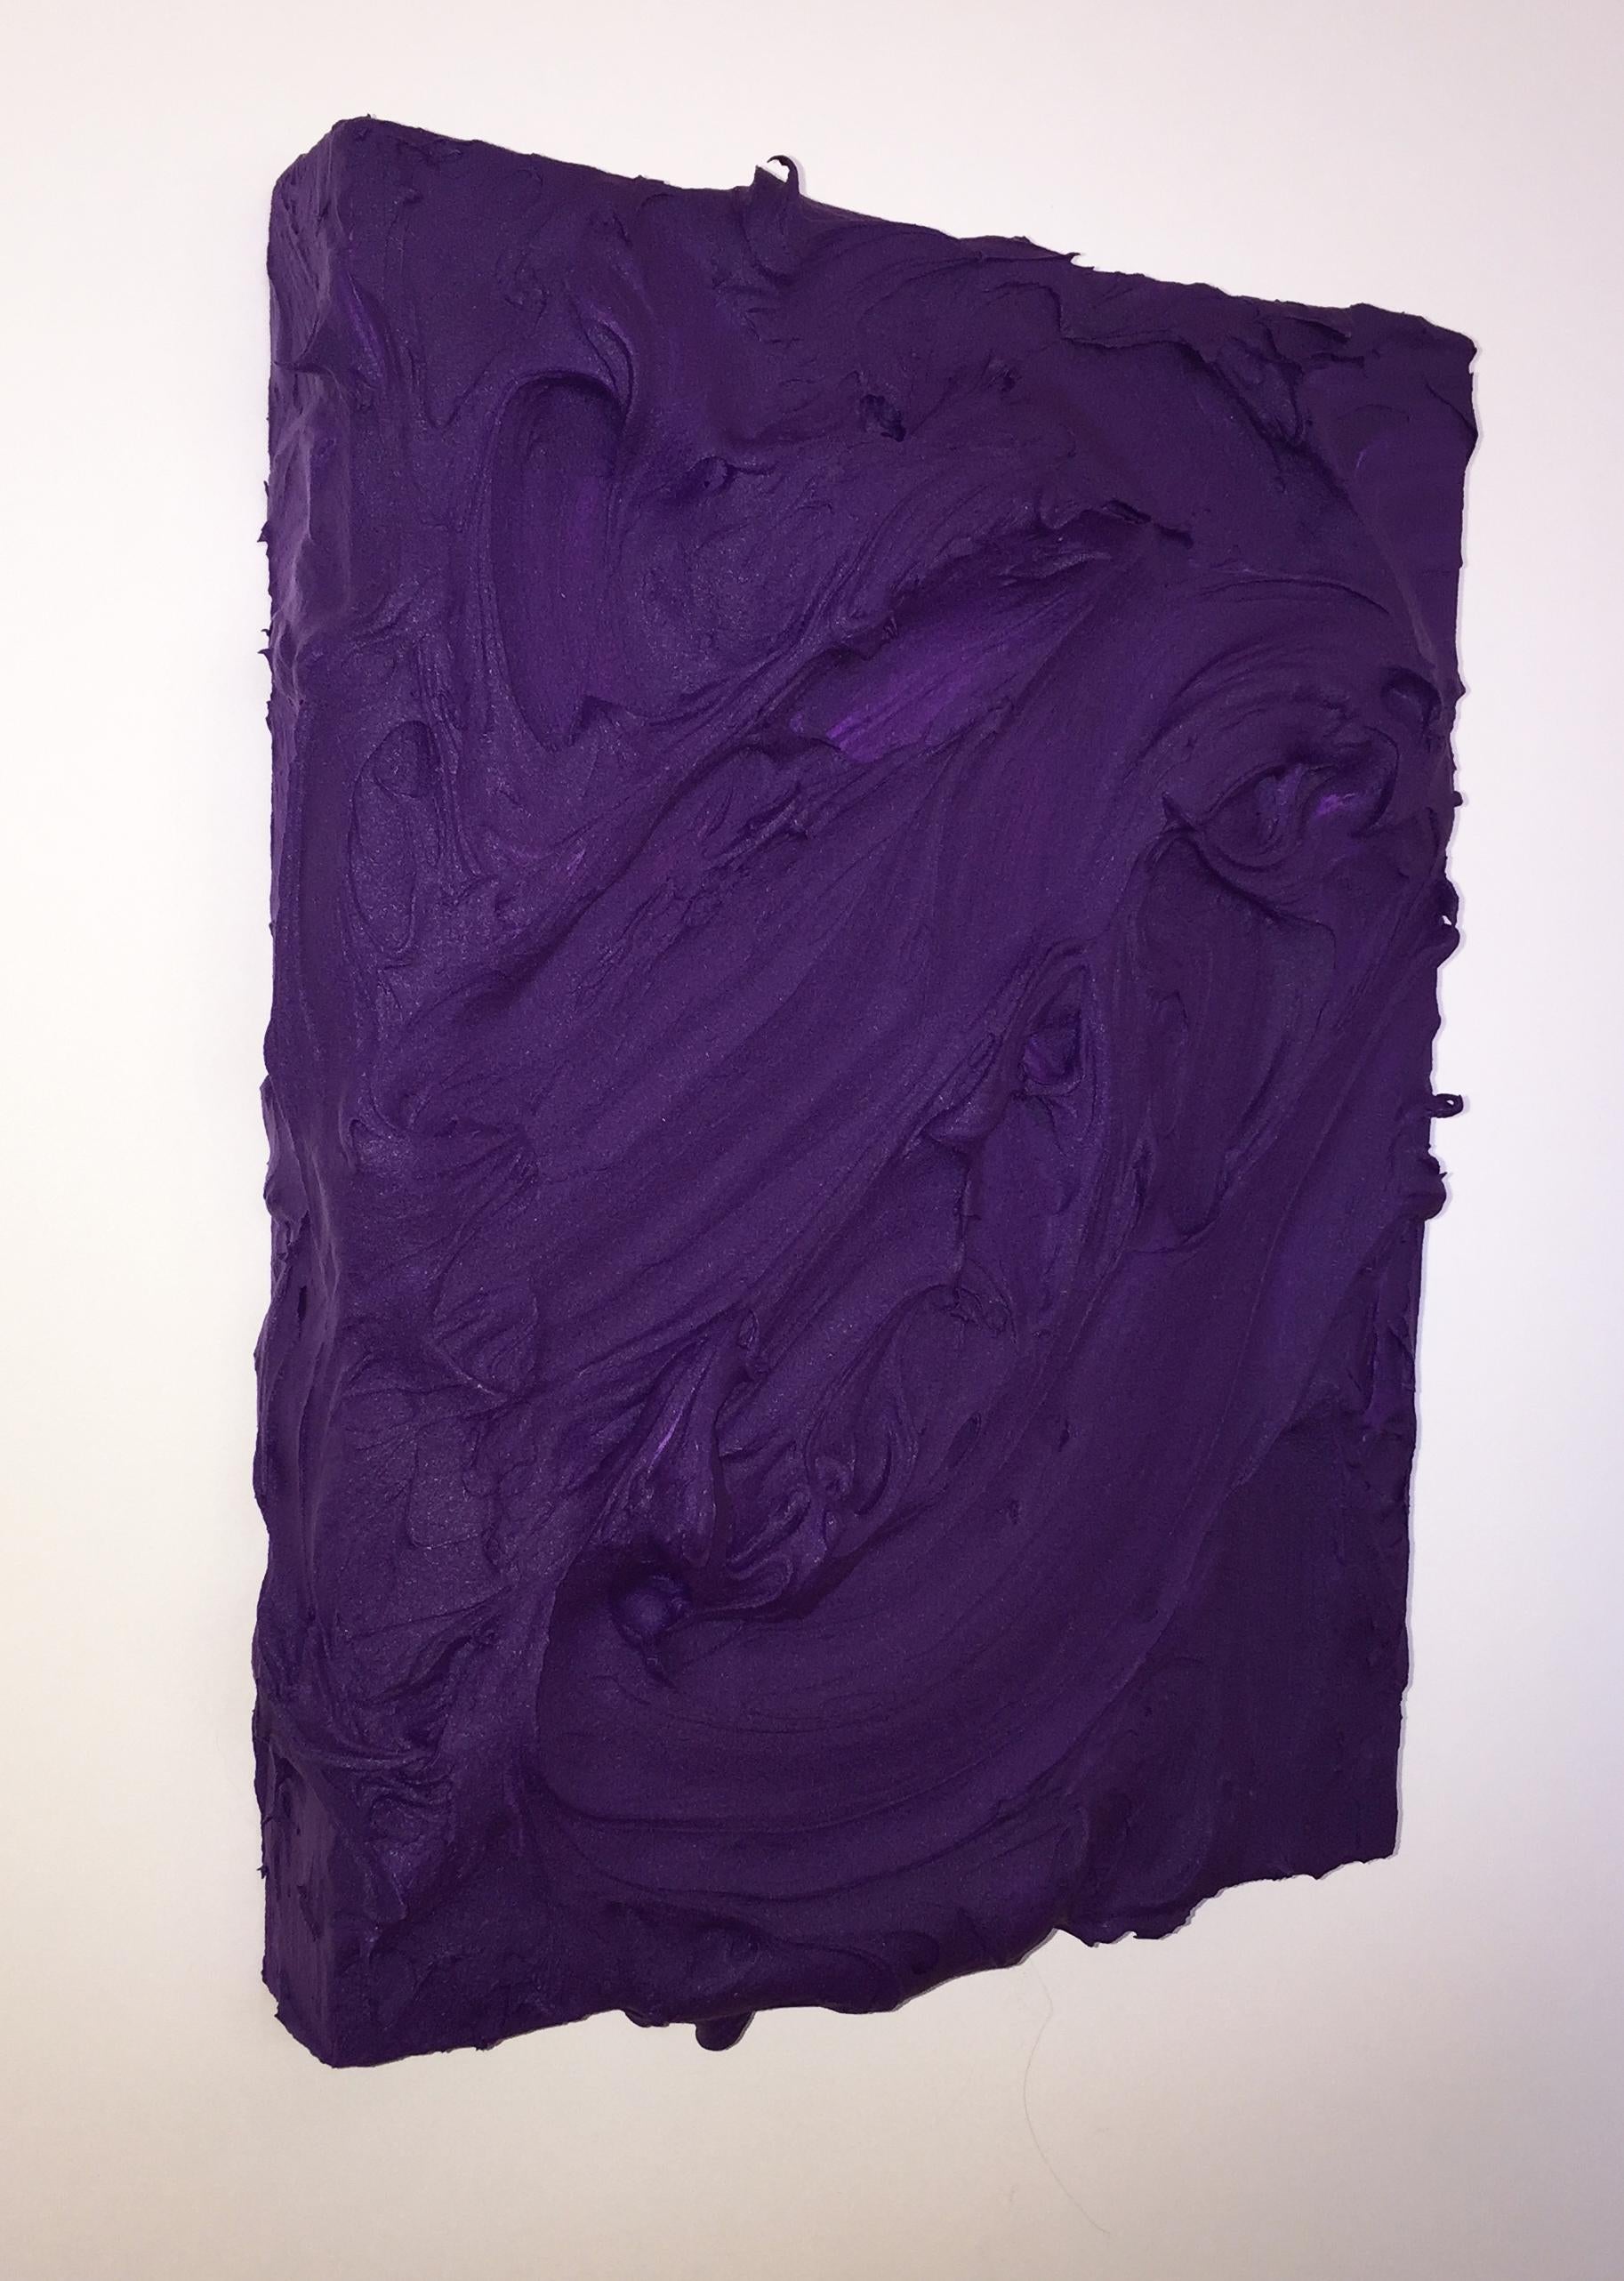 Grape Excess (violet impasto thick painting dark contemporary design vivid)  - Painting by Chloe Hedden